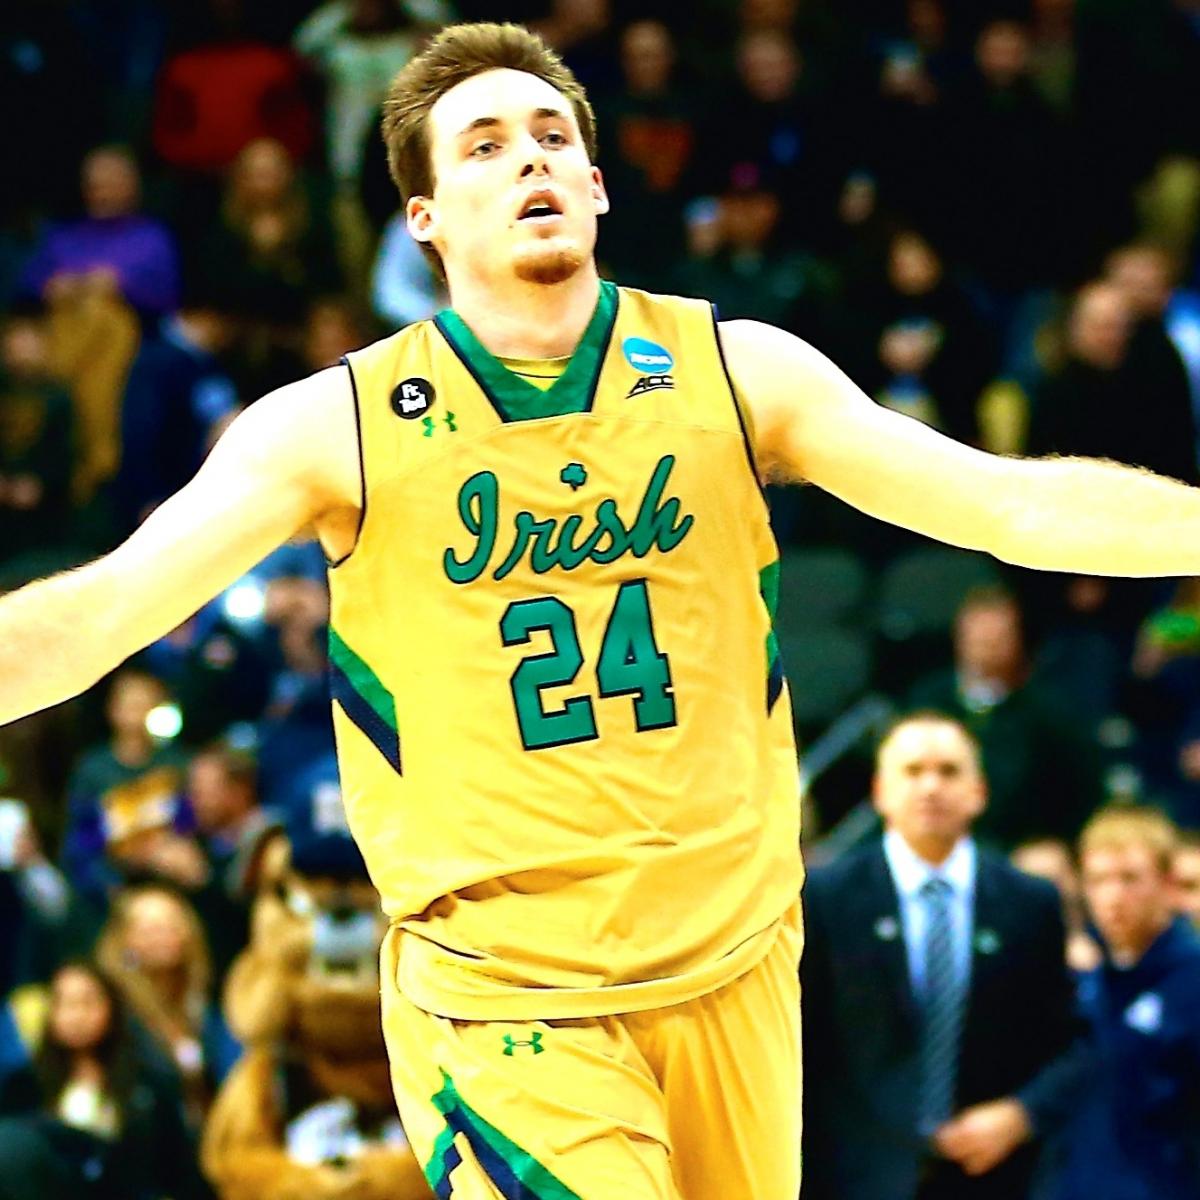 Pat Connaughton has court named after him at St. John's Prep